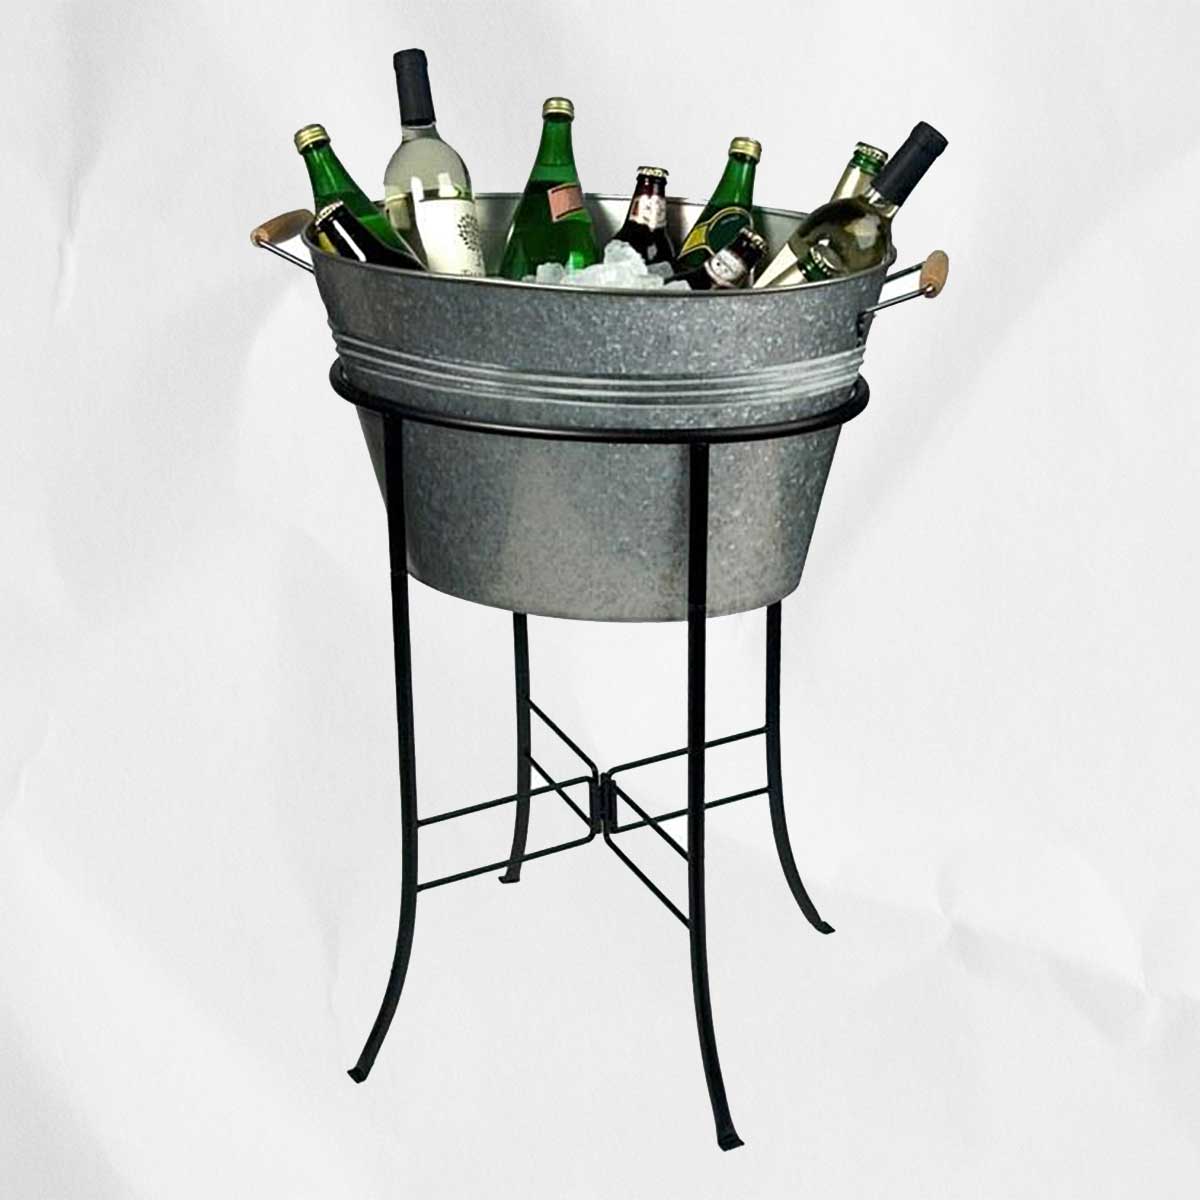 A metal beverage tub with wine, beer, and ice in it.